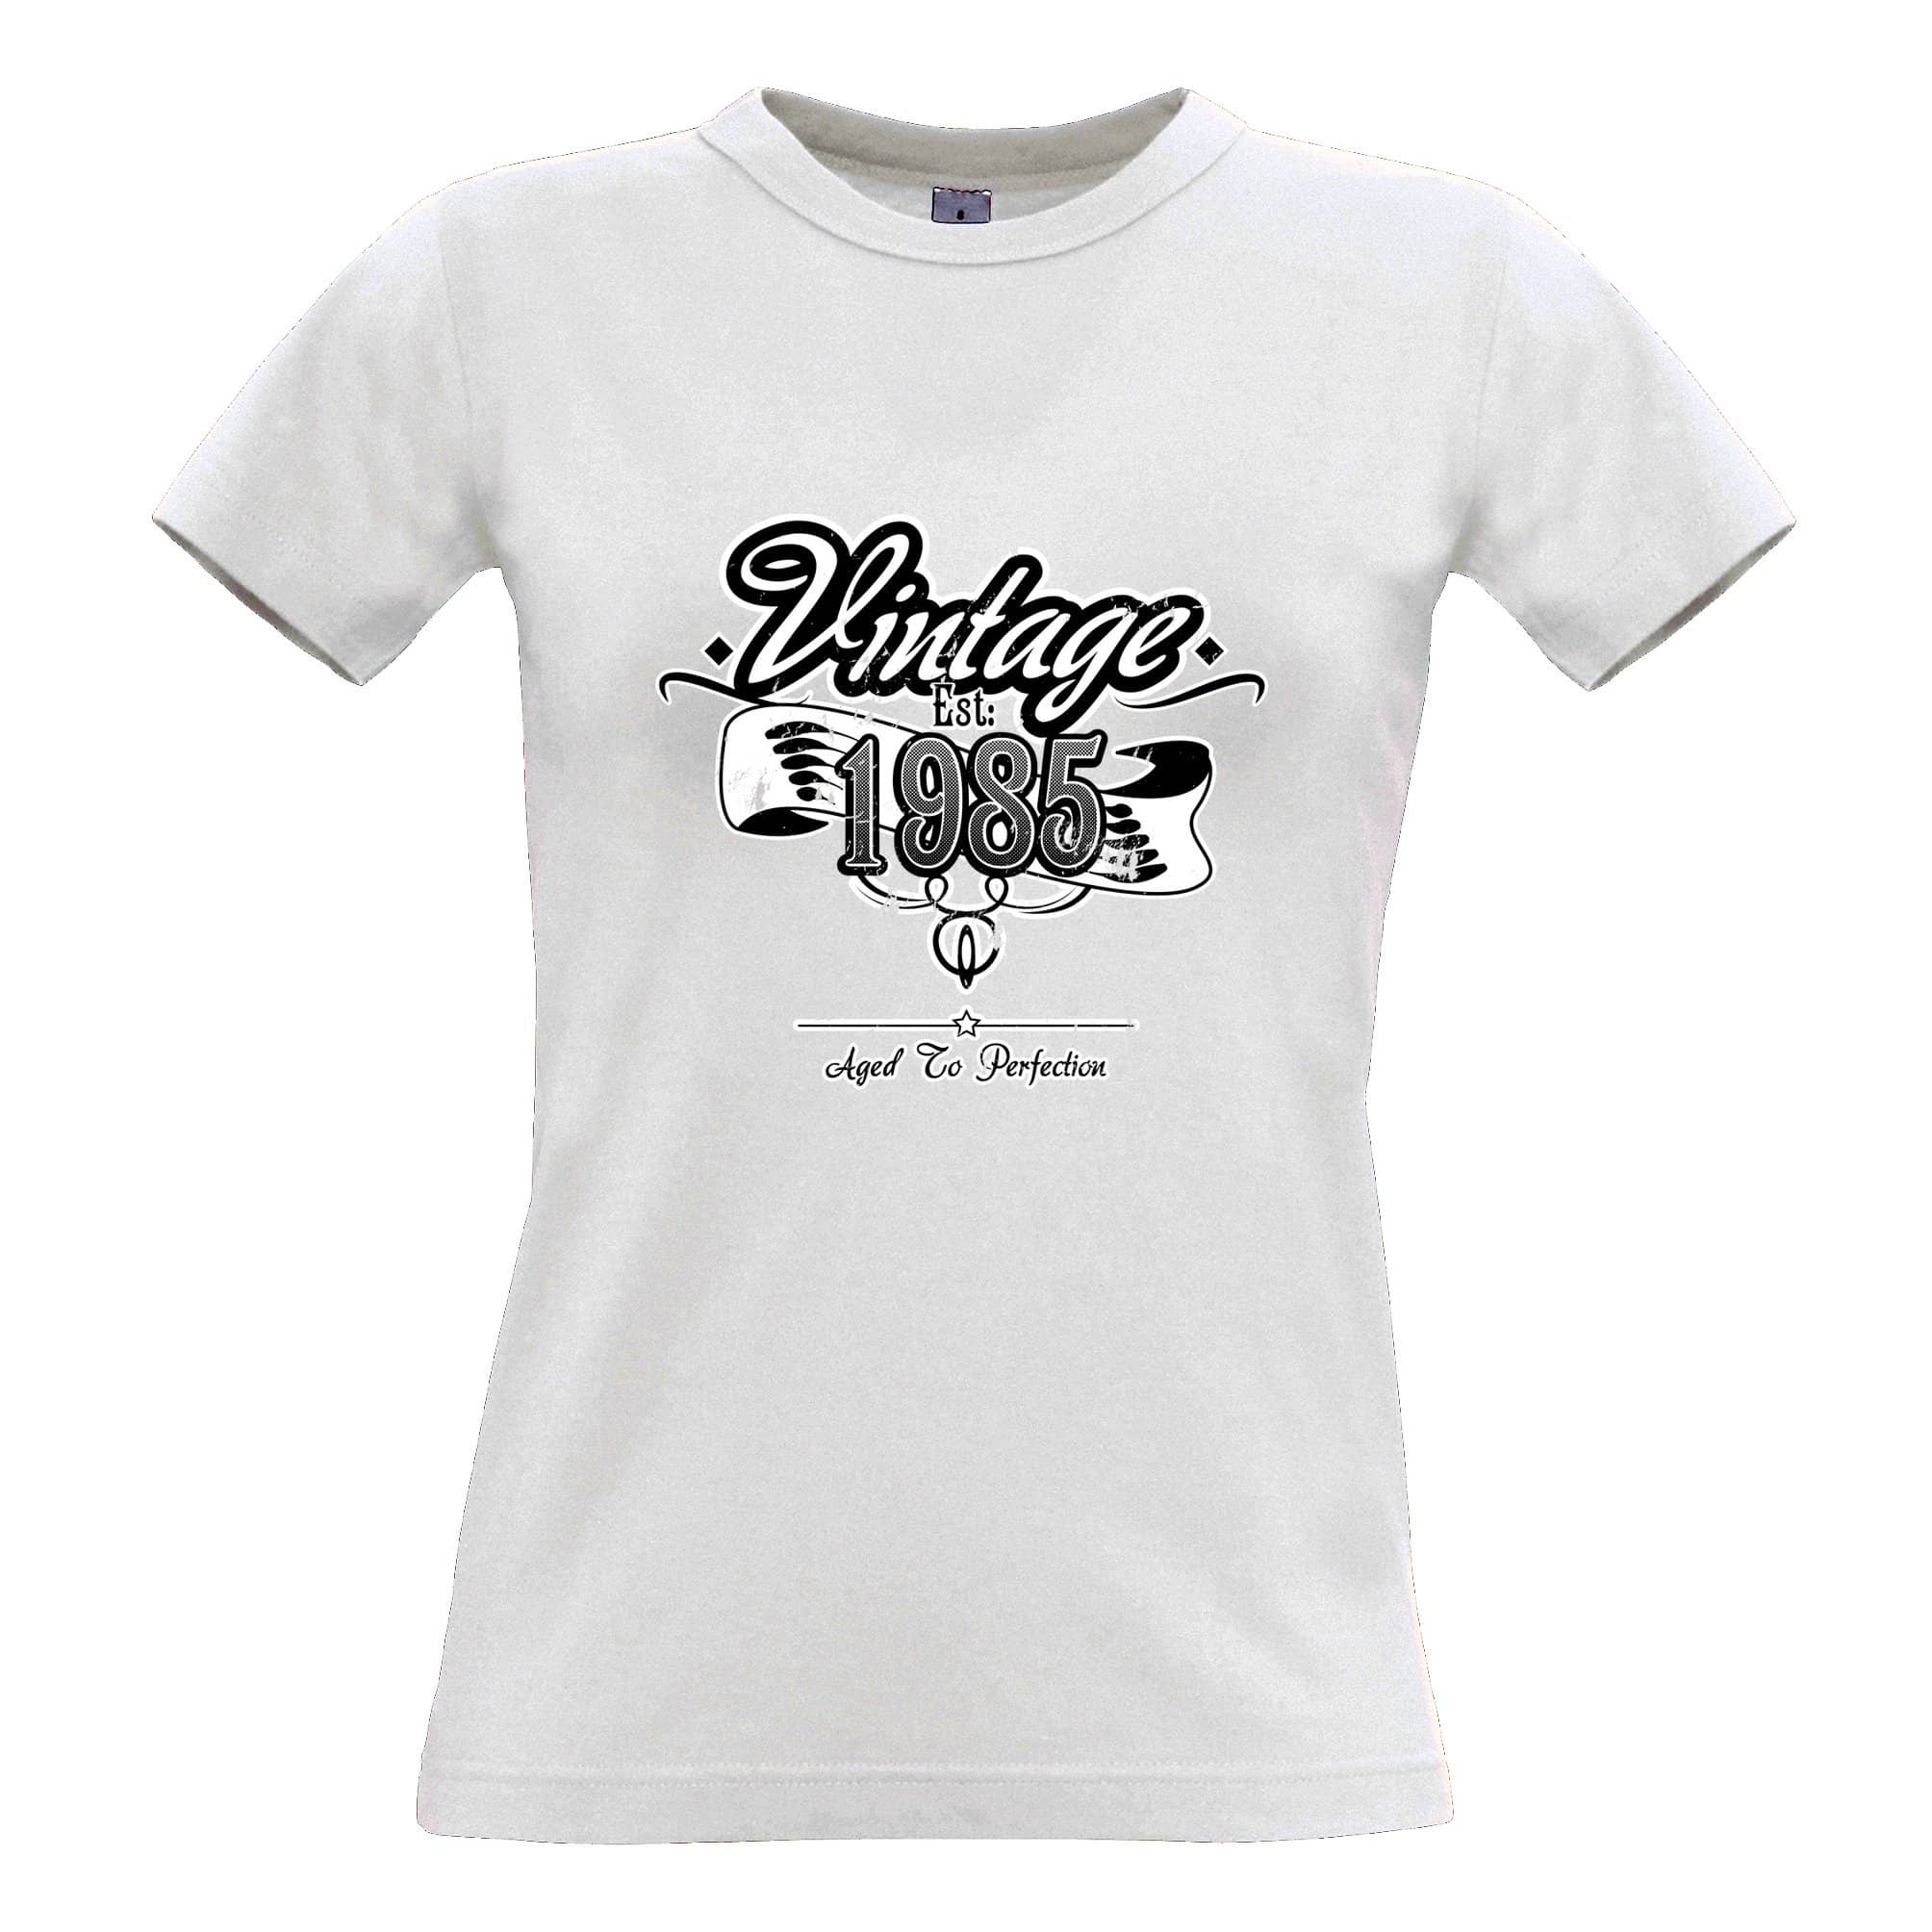 Birthday Womens T Shirt Vintage Est. 1985 Aged To Perfection